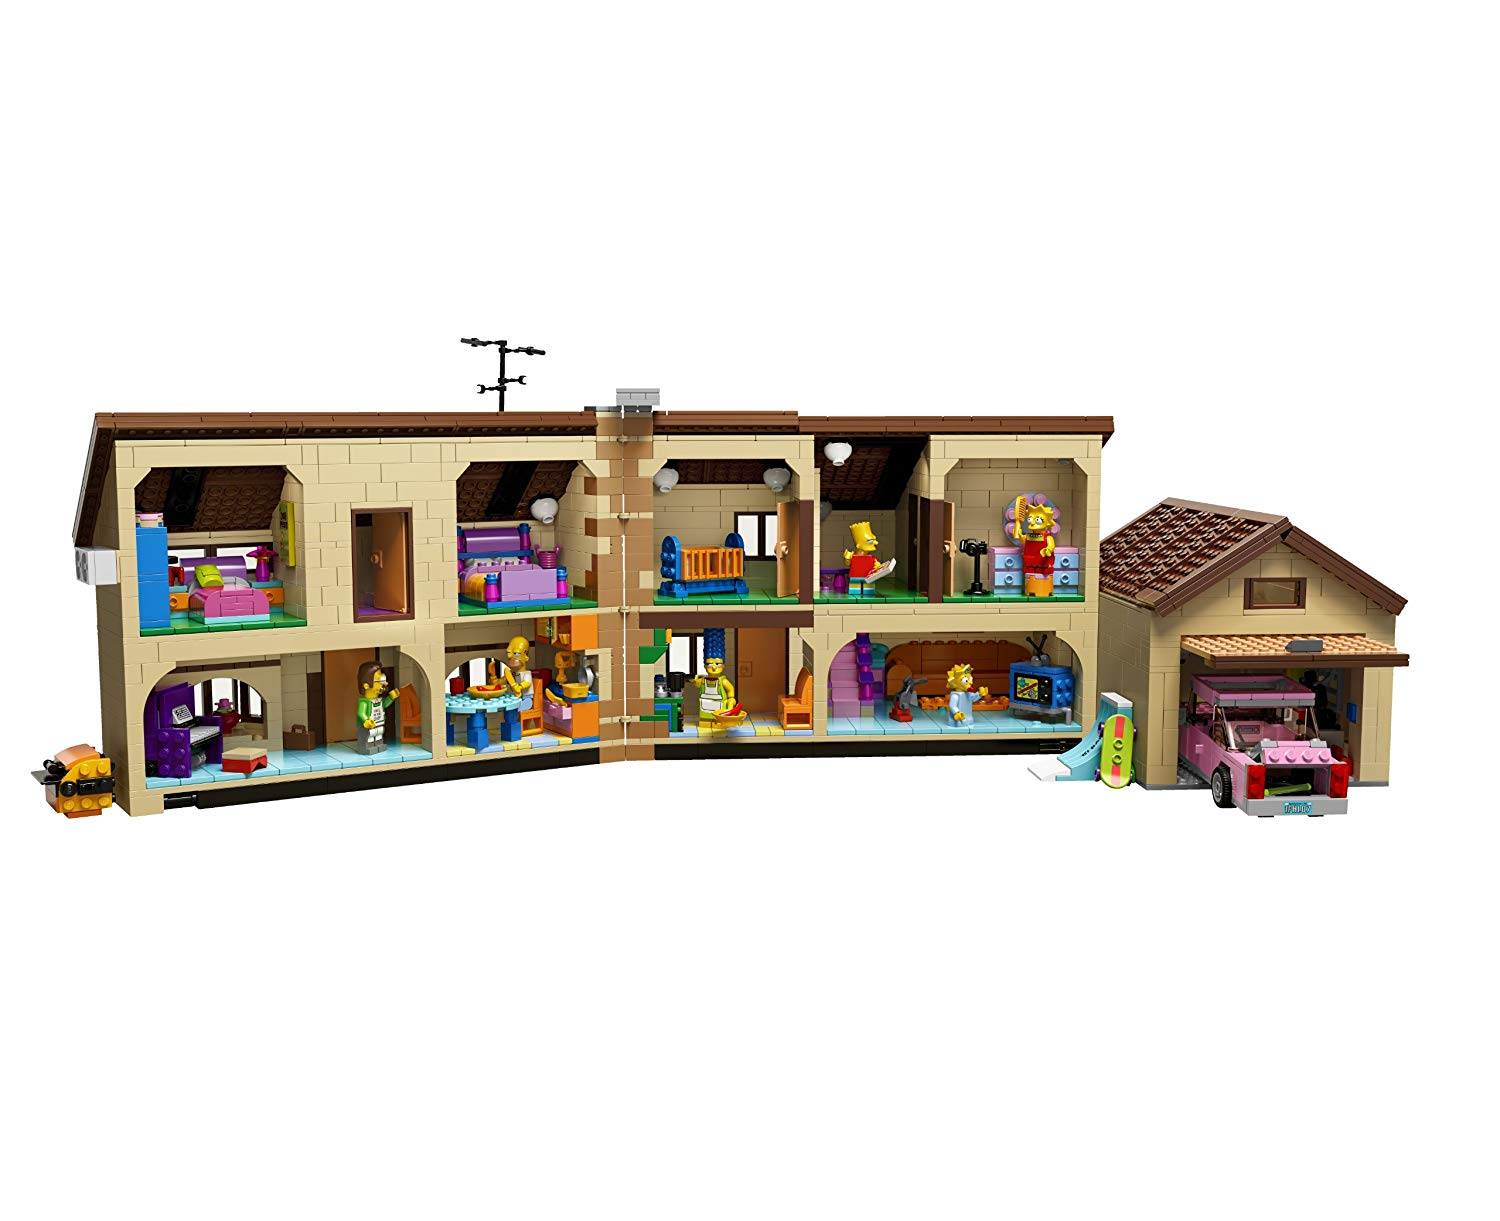 LEGO THE SIMPSONS HOUSE 71006